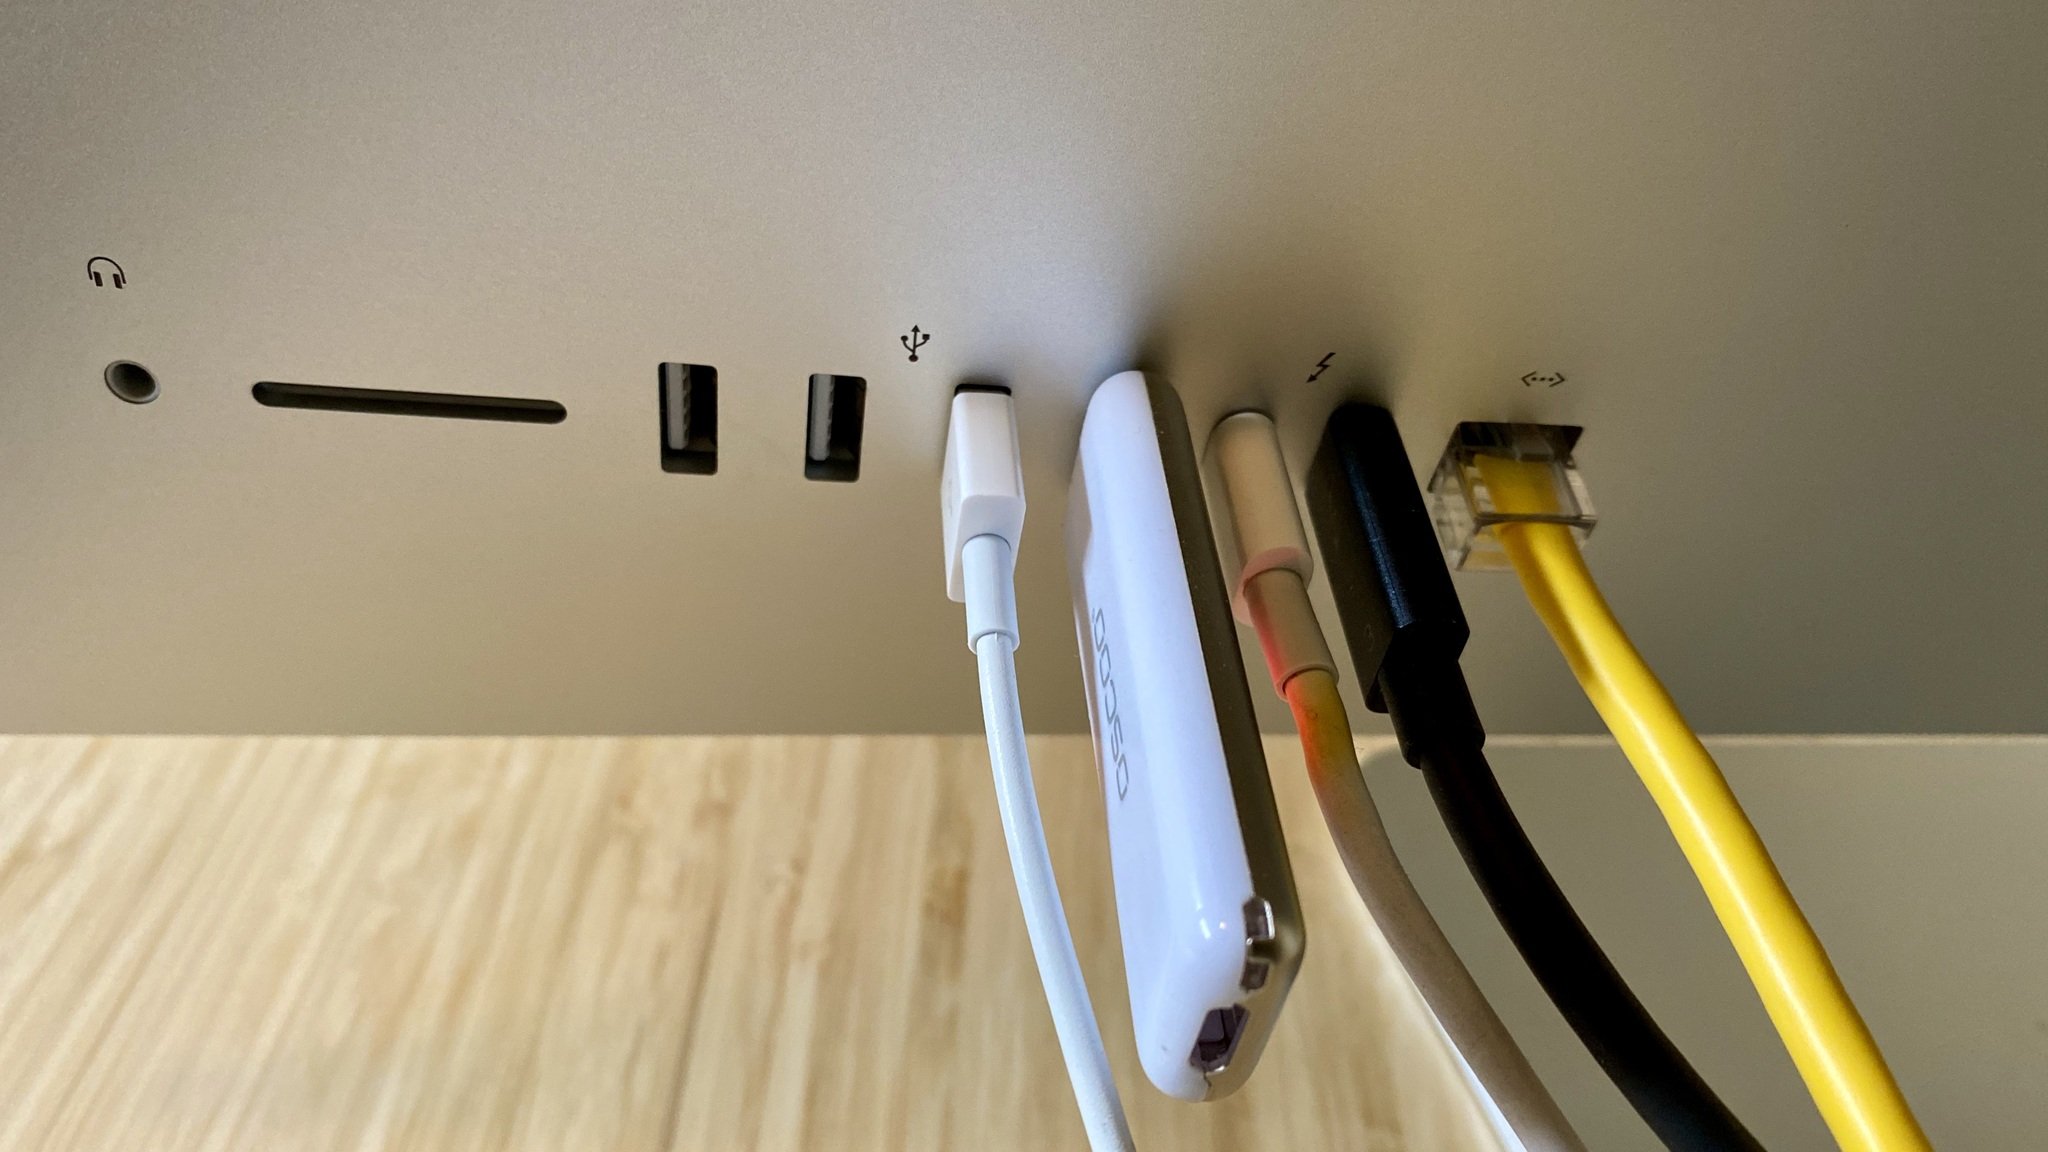 27-inch iMac 2020 ports with cables plugged in